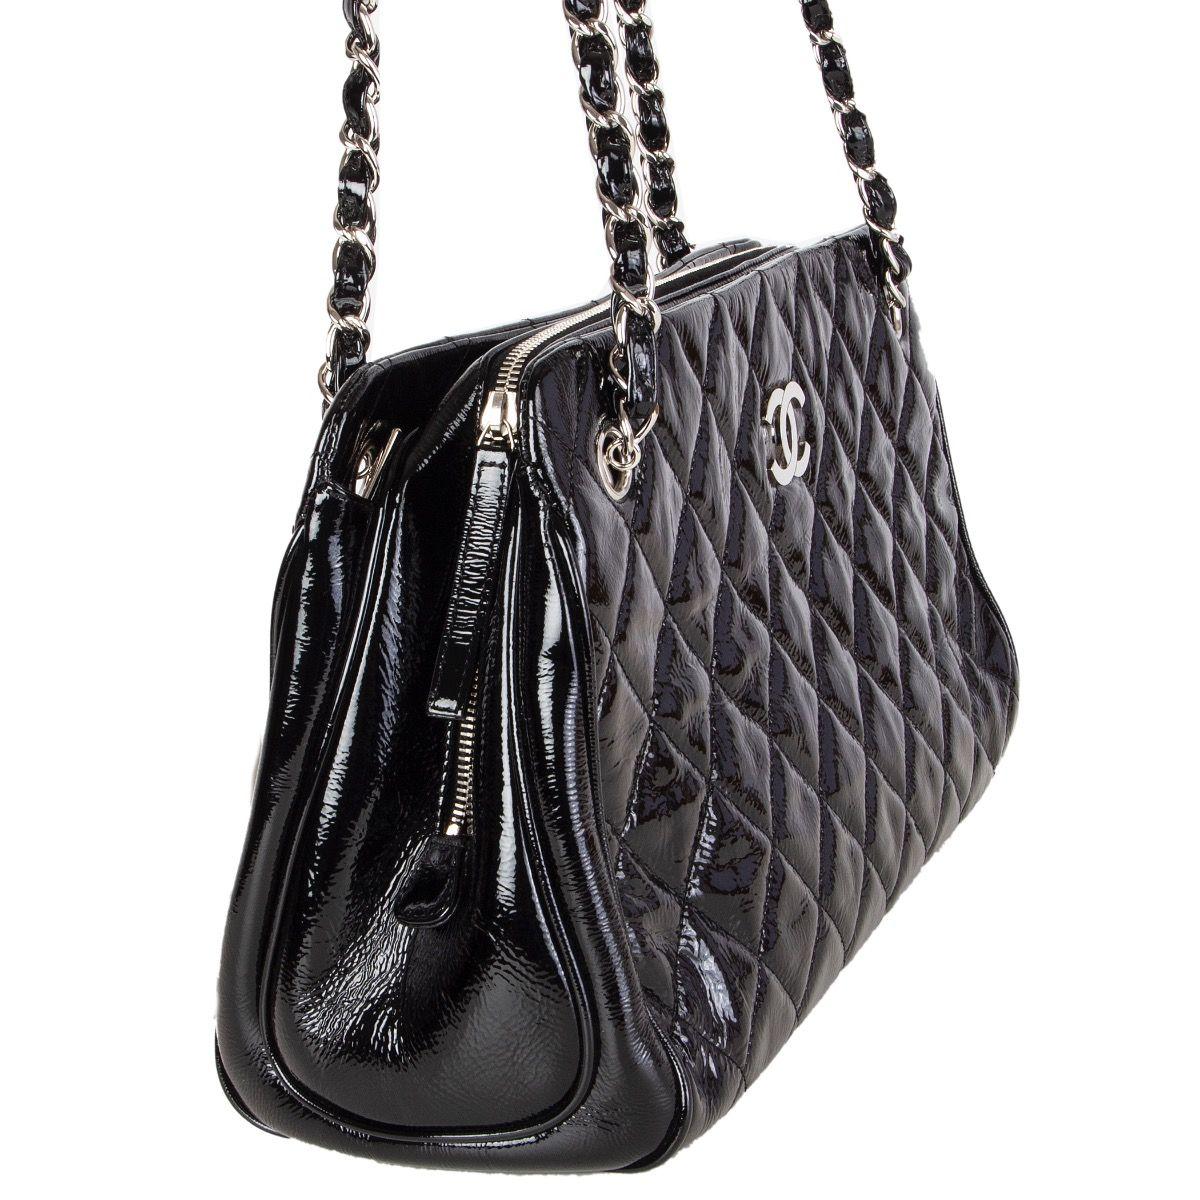 Chanel shoulder bag in black quilted patent leather with silver-tone CC and chain. Open pocket on the outside back. Two open pocket on each side with a zipper pocket in the middle. Lined in black leather with two open pockets against the front and a